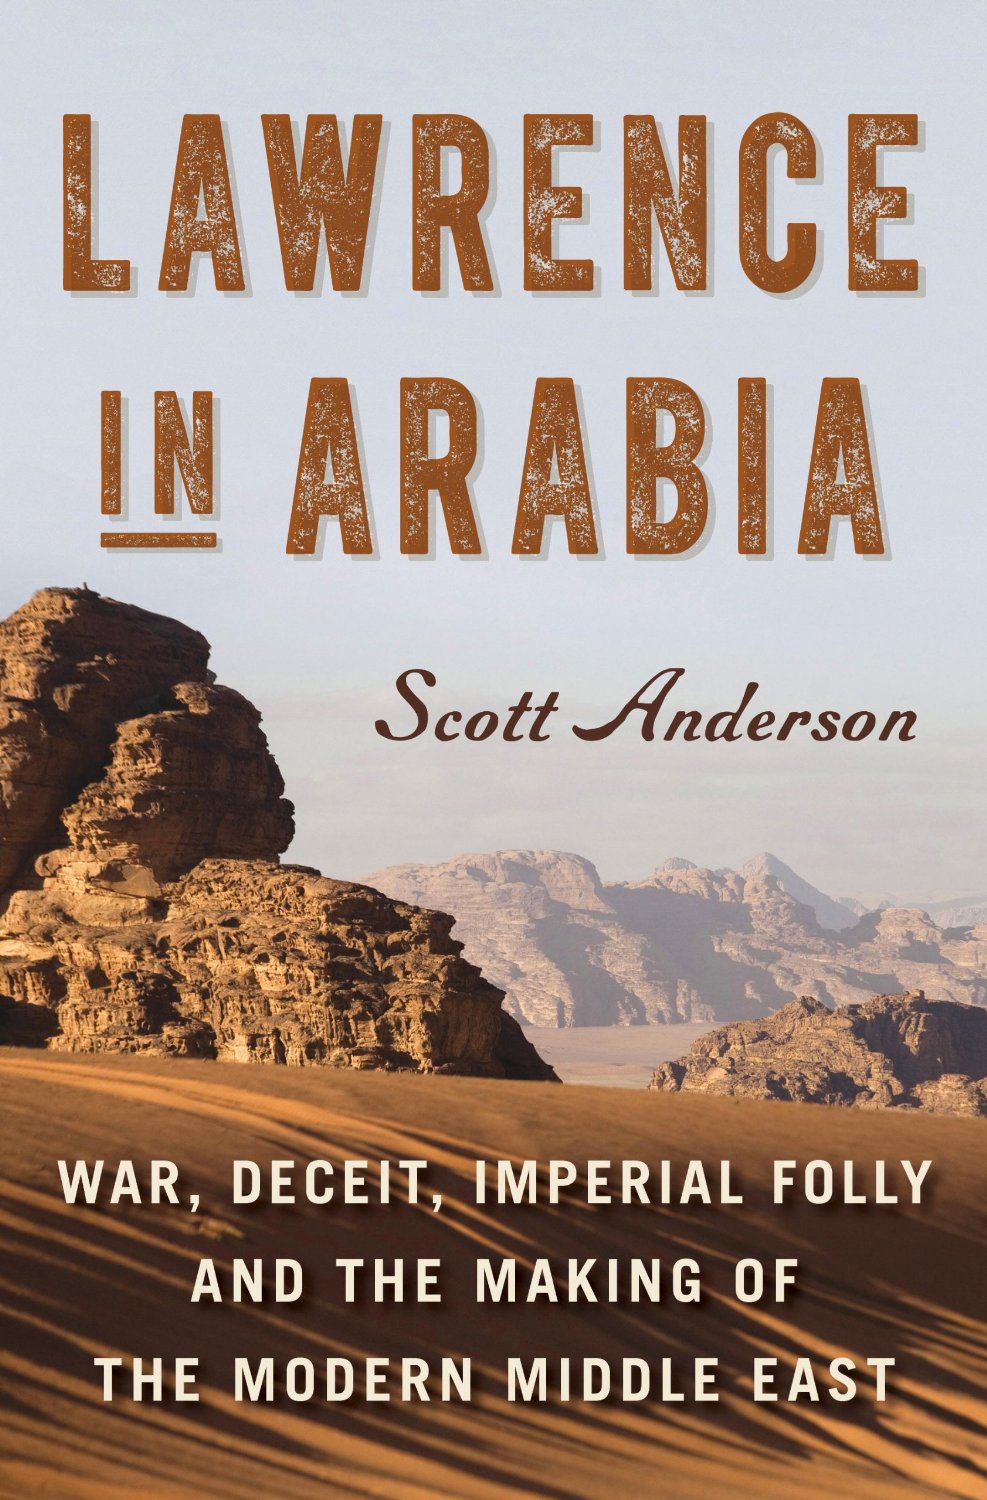 Best Lawrence Of Arabia Quotes in the world Learn more here 